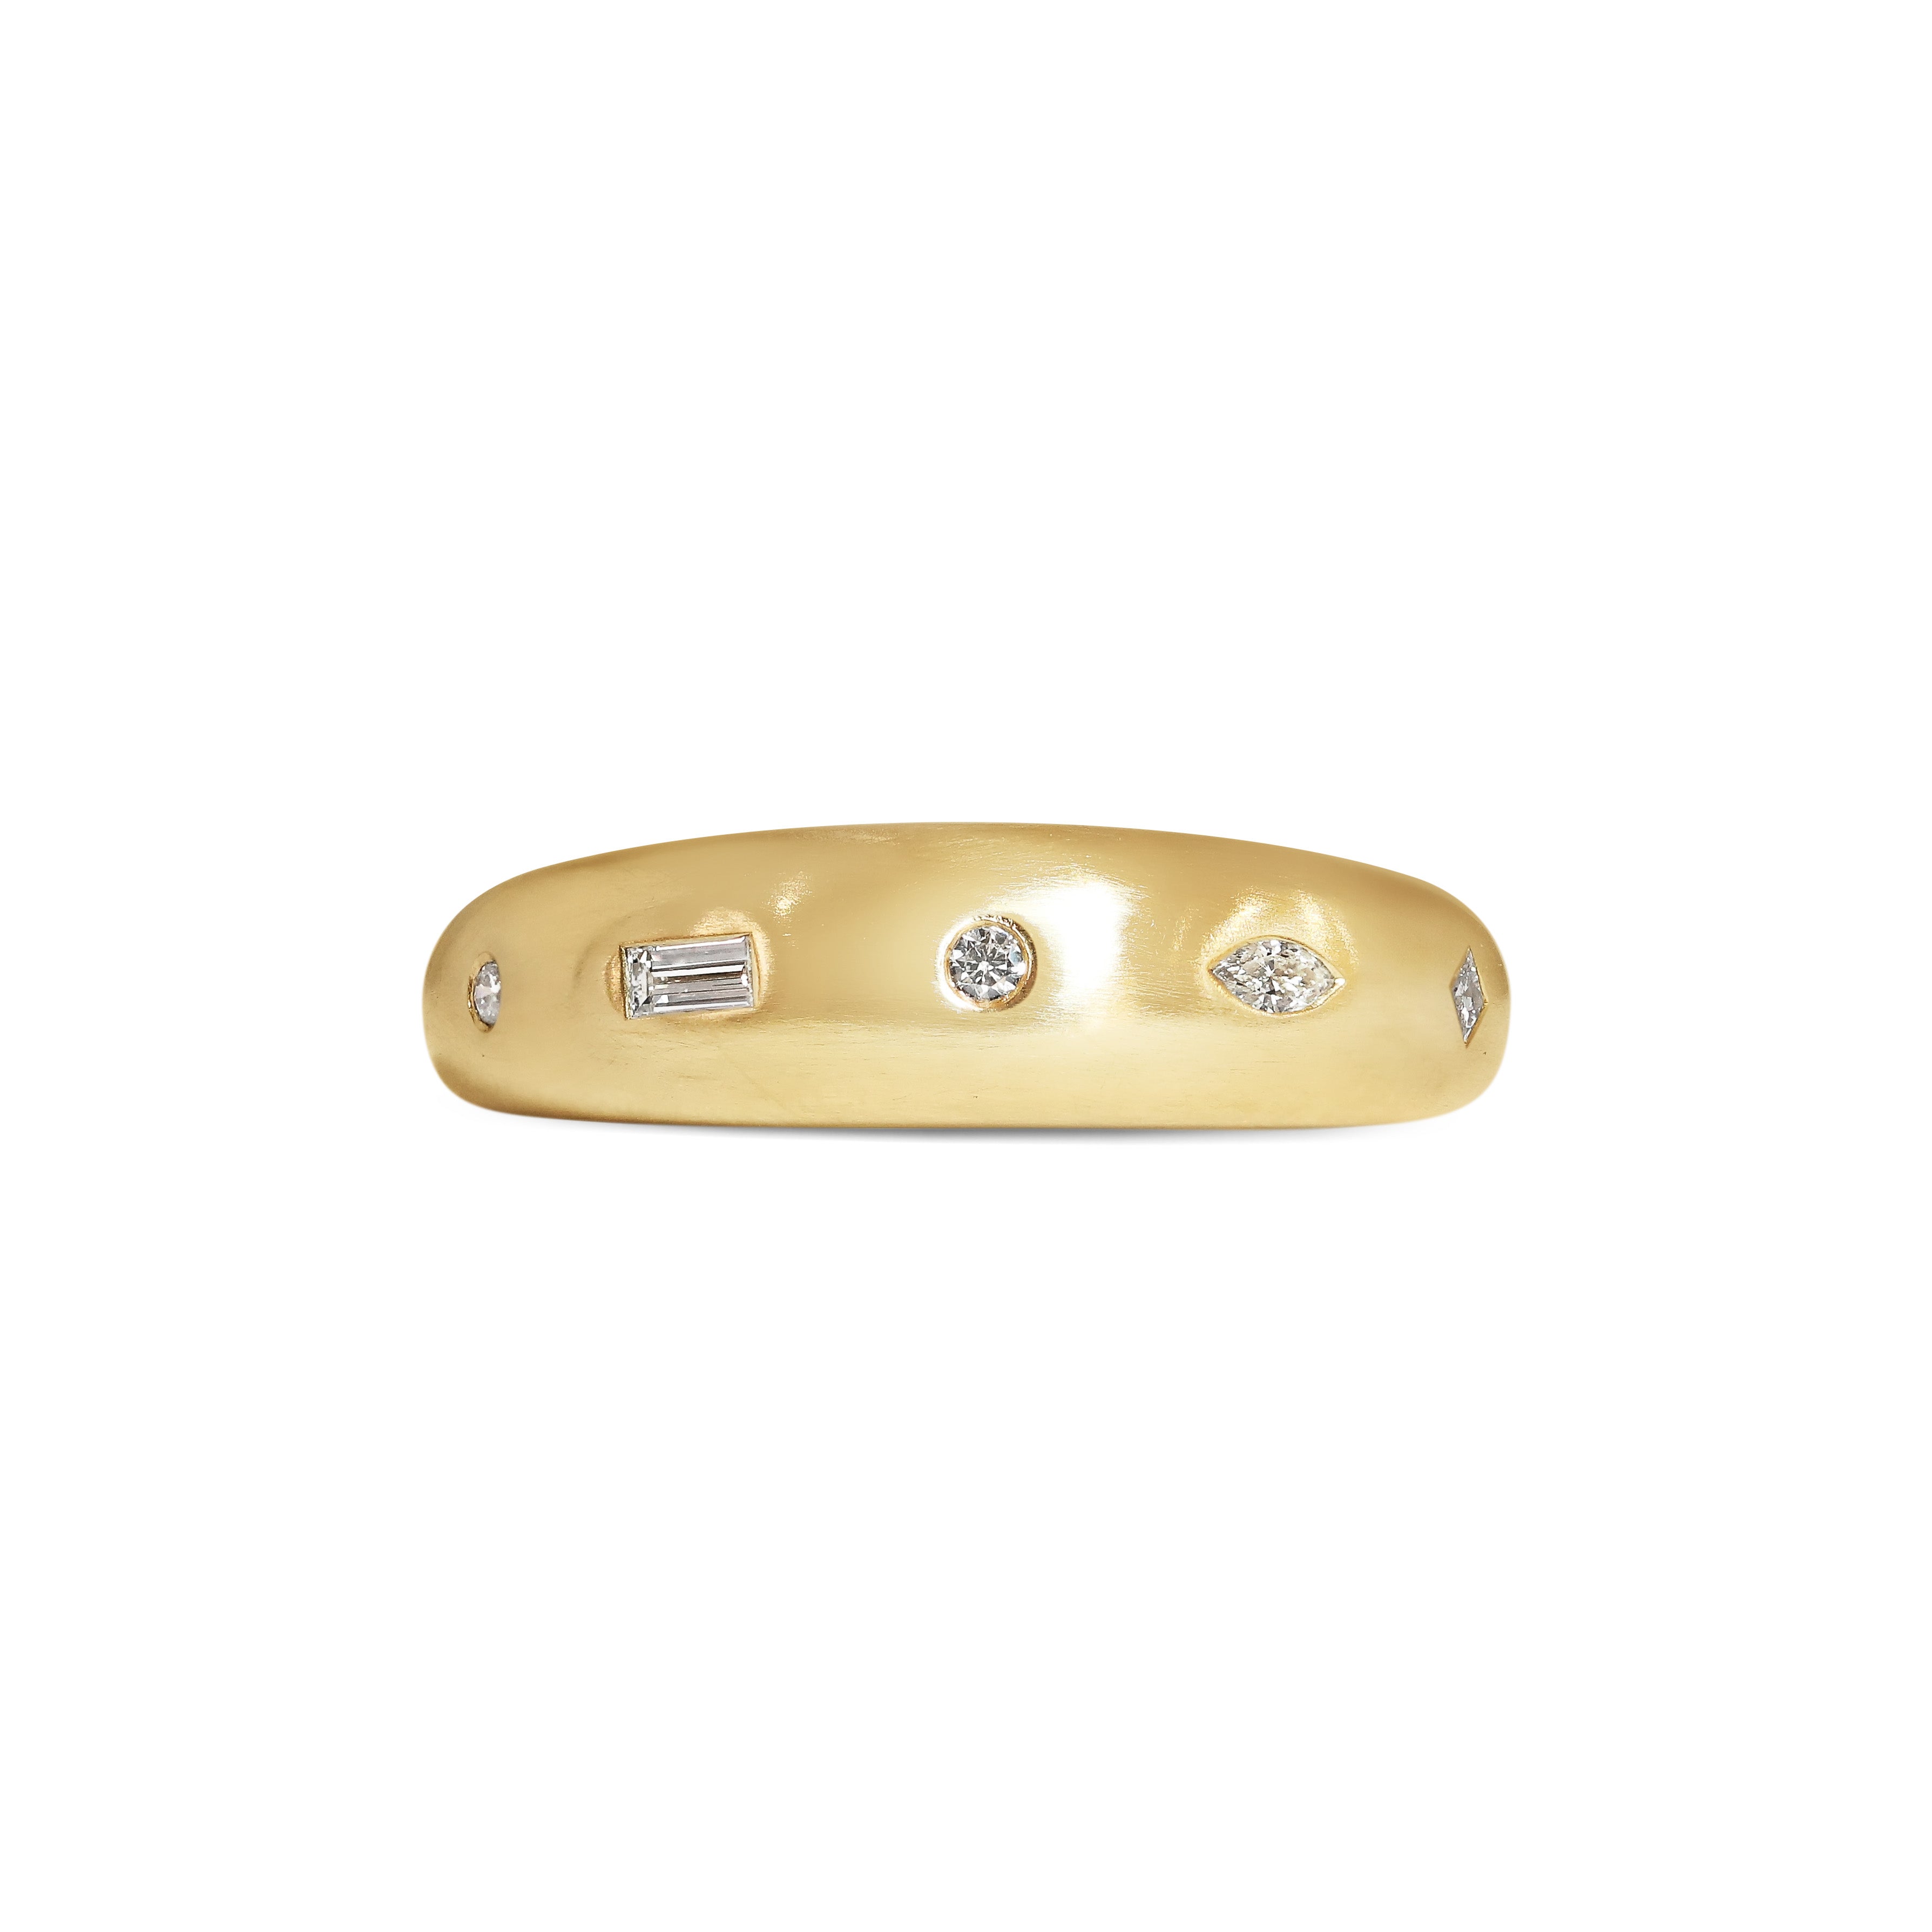 The Mixed Diamond Bombe Ring - Matte Finish by East London jeweller Rachel Boston | Discover our collections of unique and timeless engagement rings, wedding rings, and modern fine jewellery.